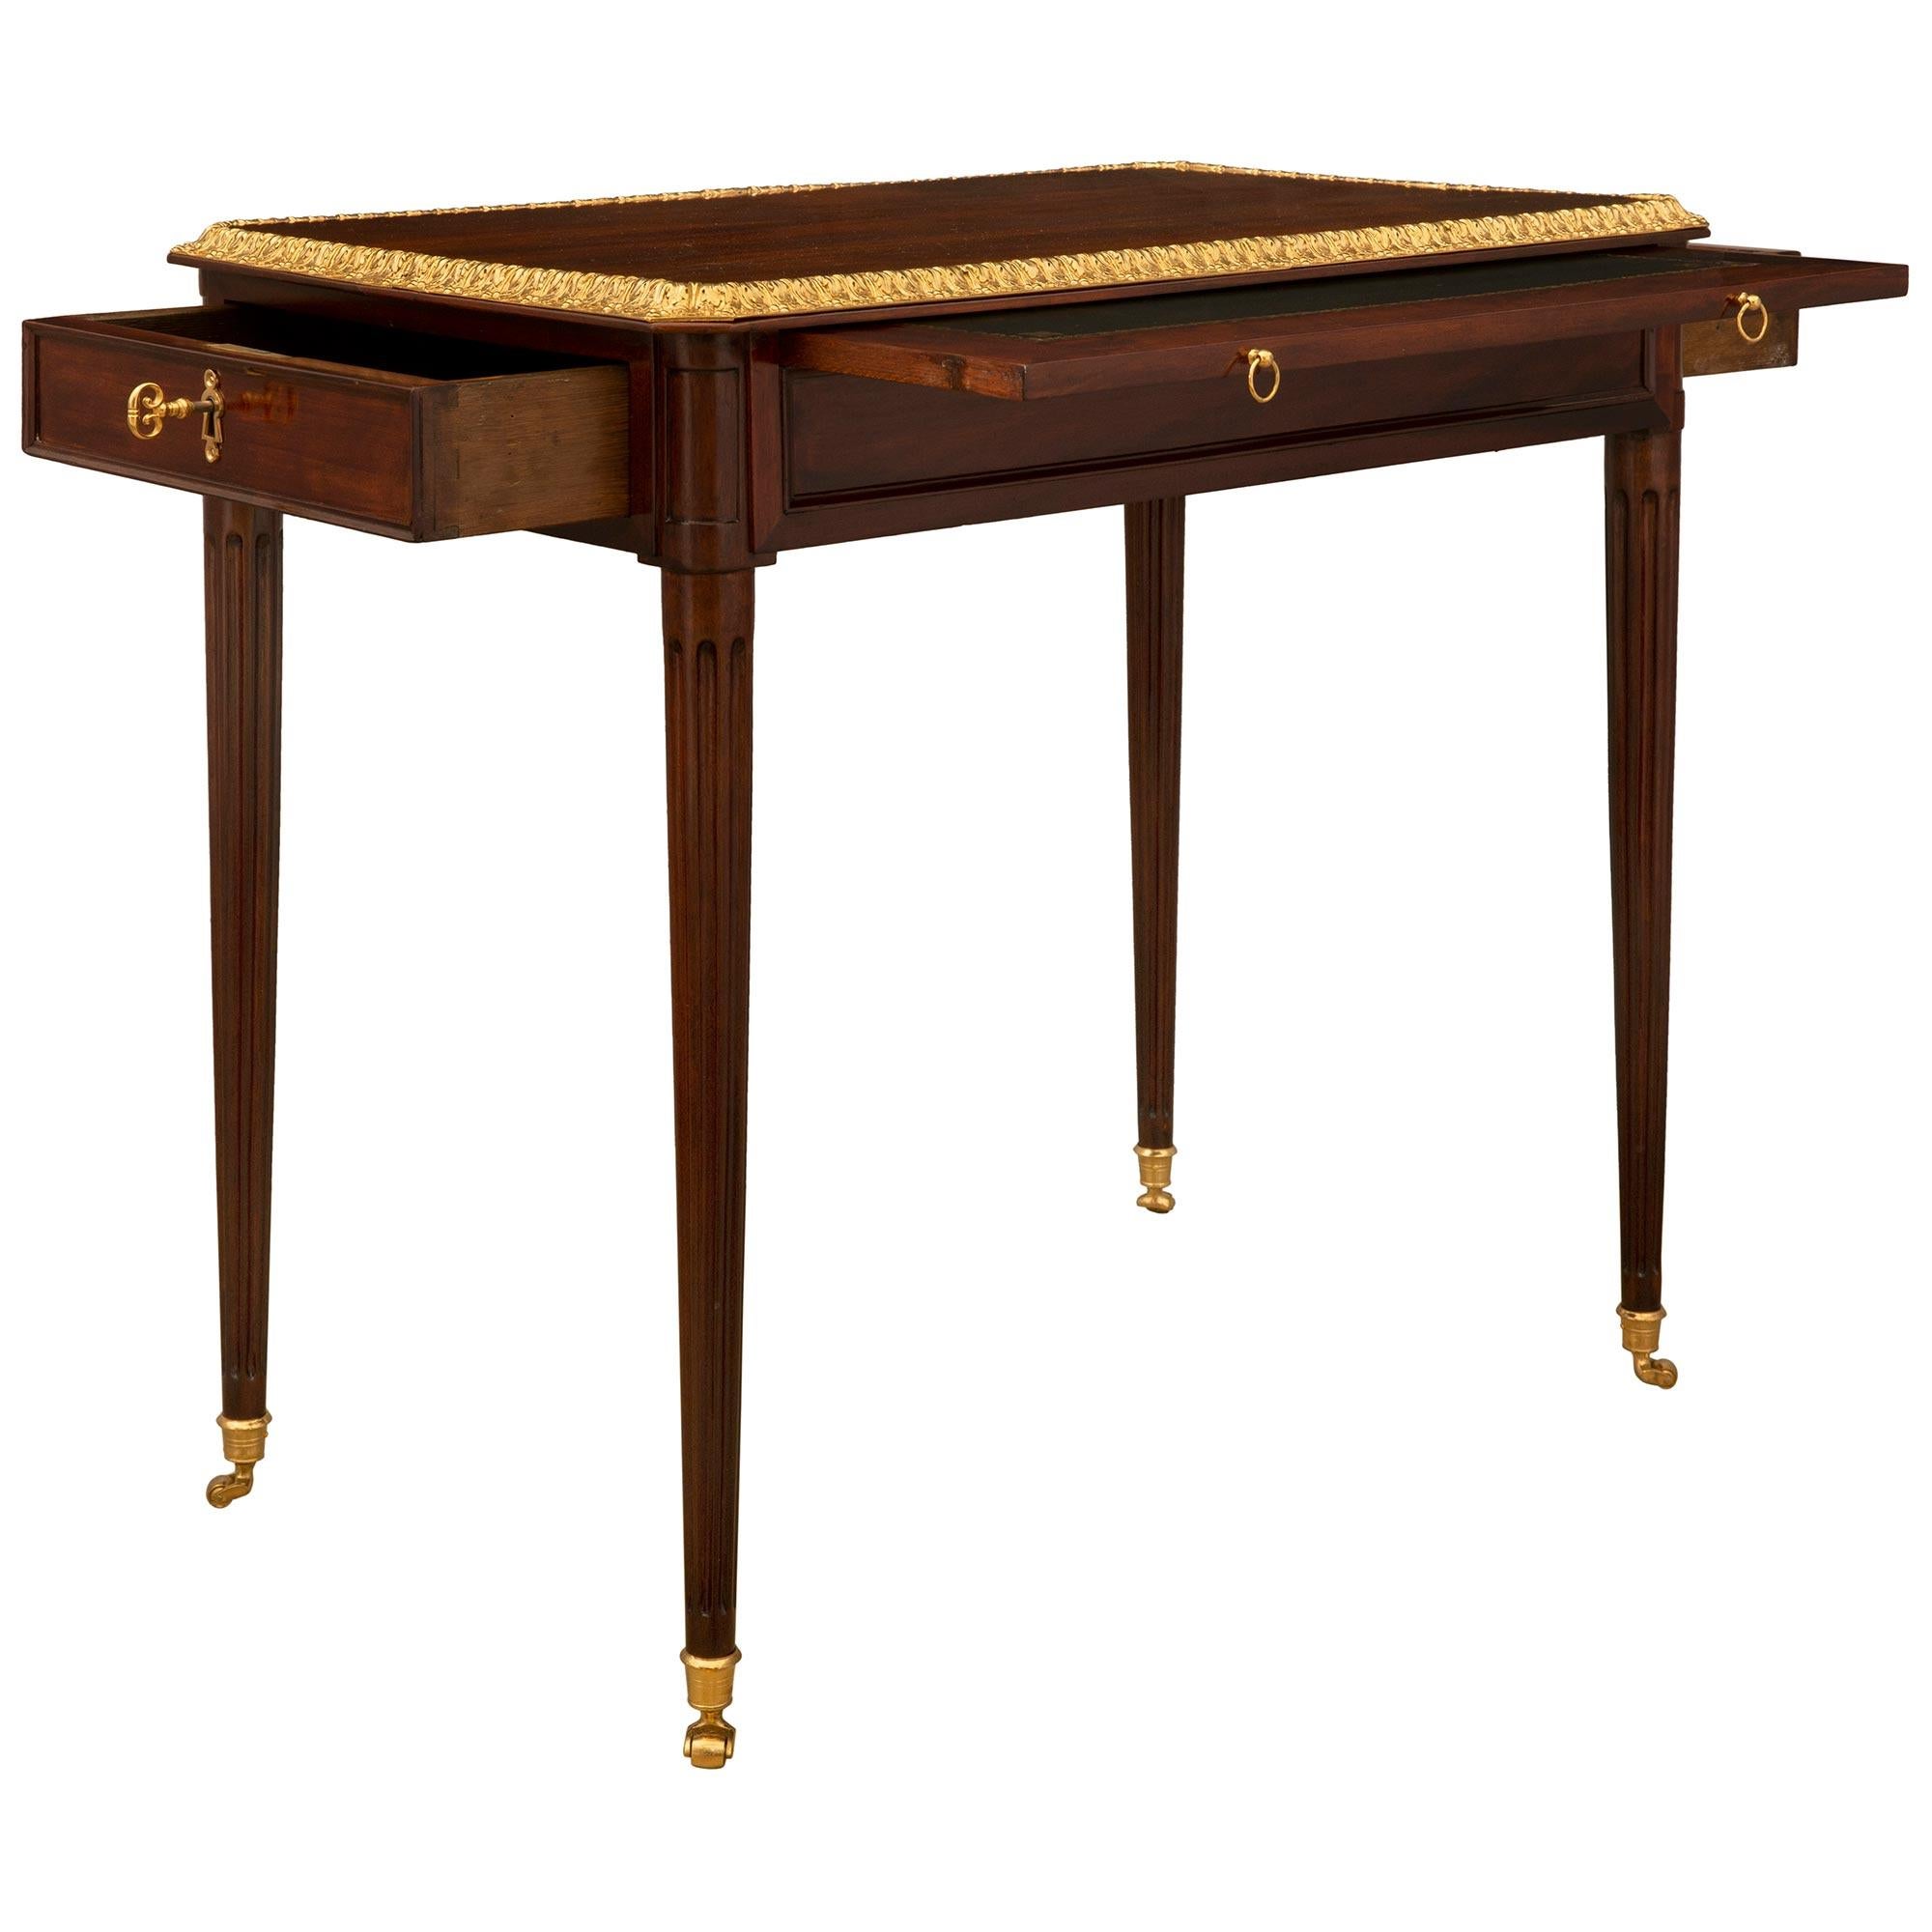 18th Century and Earlier French 18th Century Louis XVI Period Mahogany and Ormolu Side Table / Desk For Sale